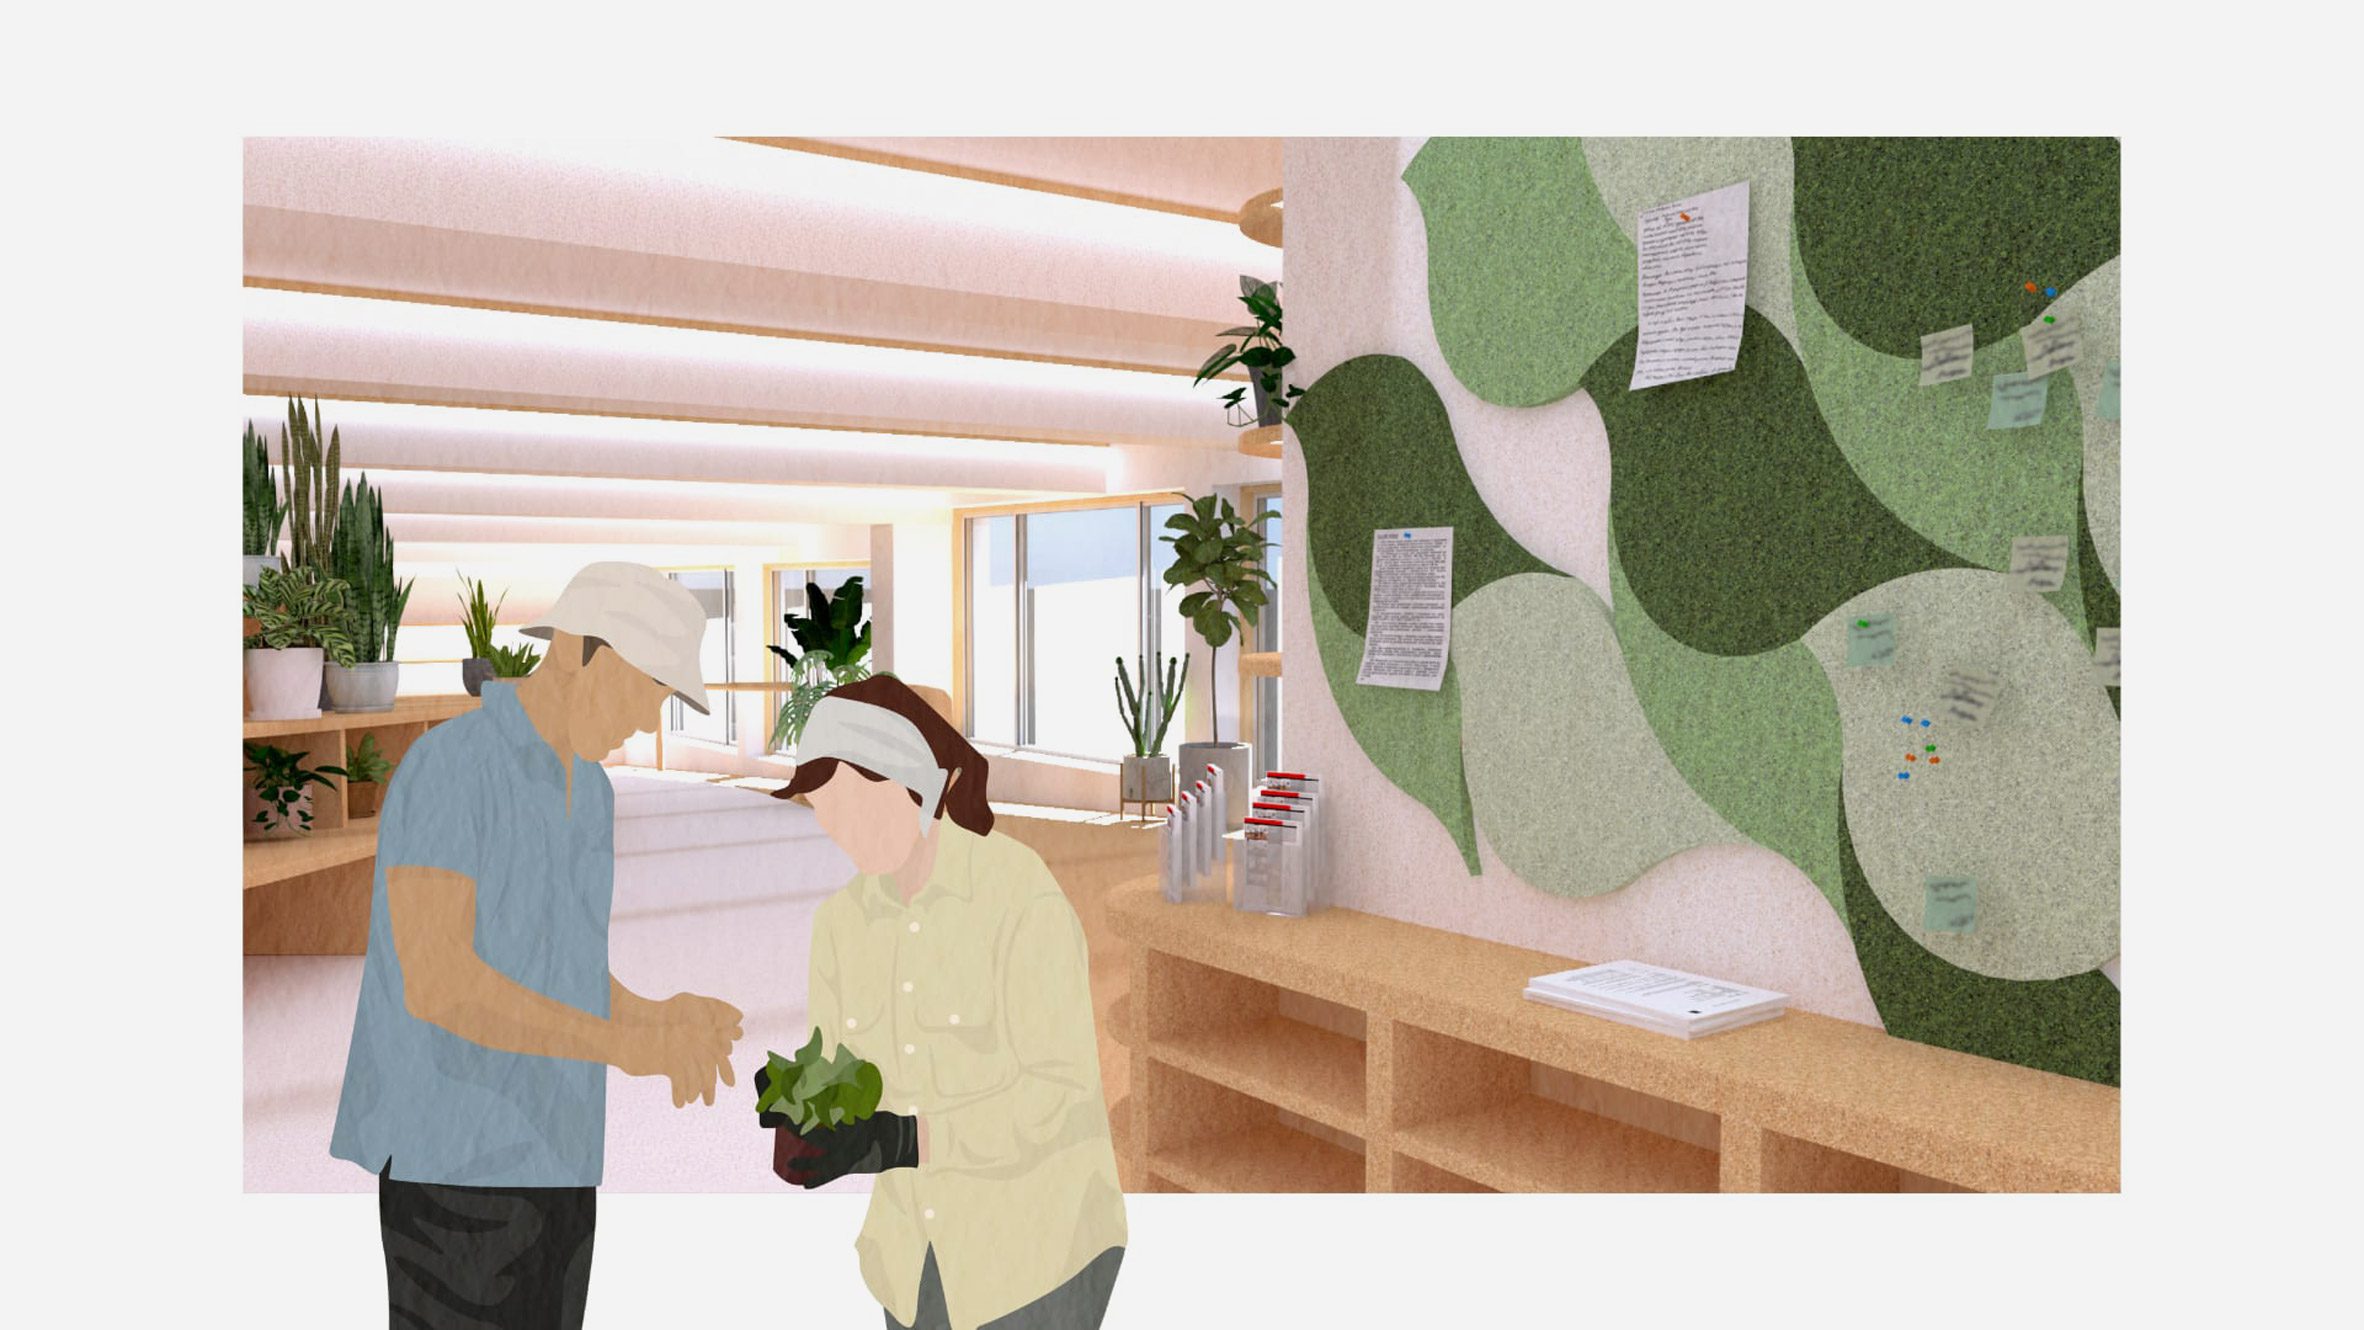 Interior visualisation of house plant caring and education facility